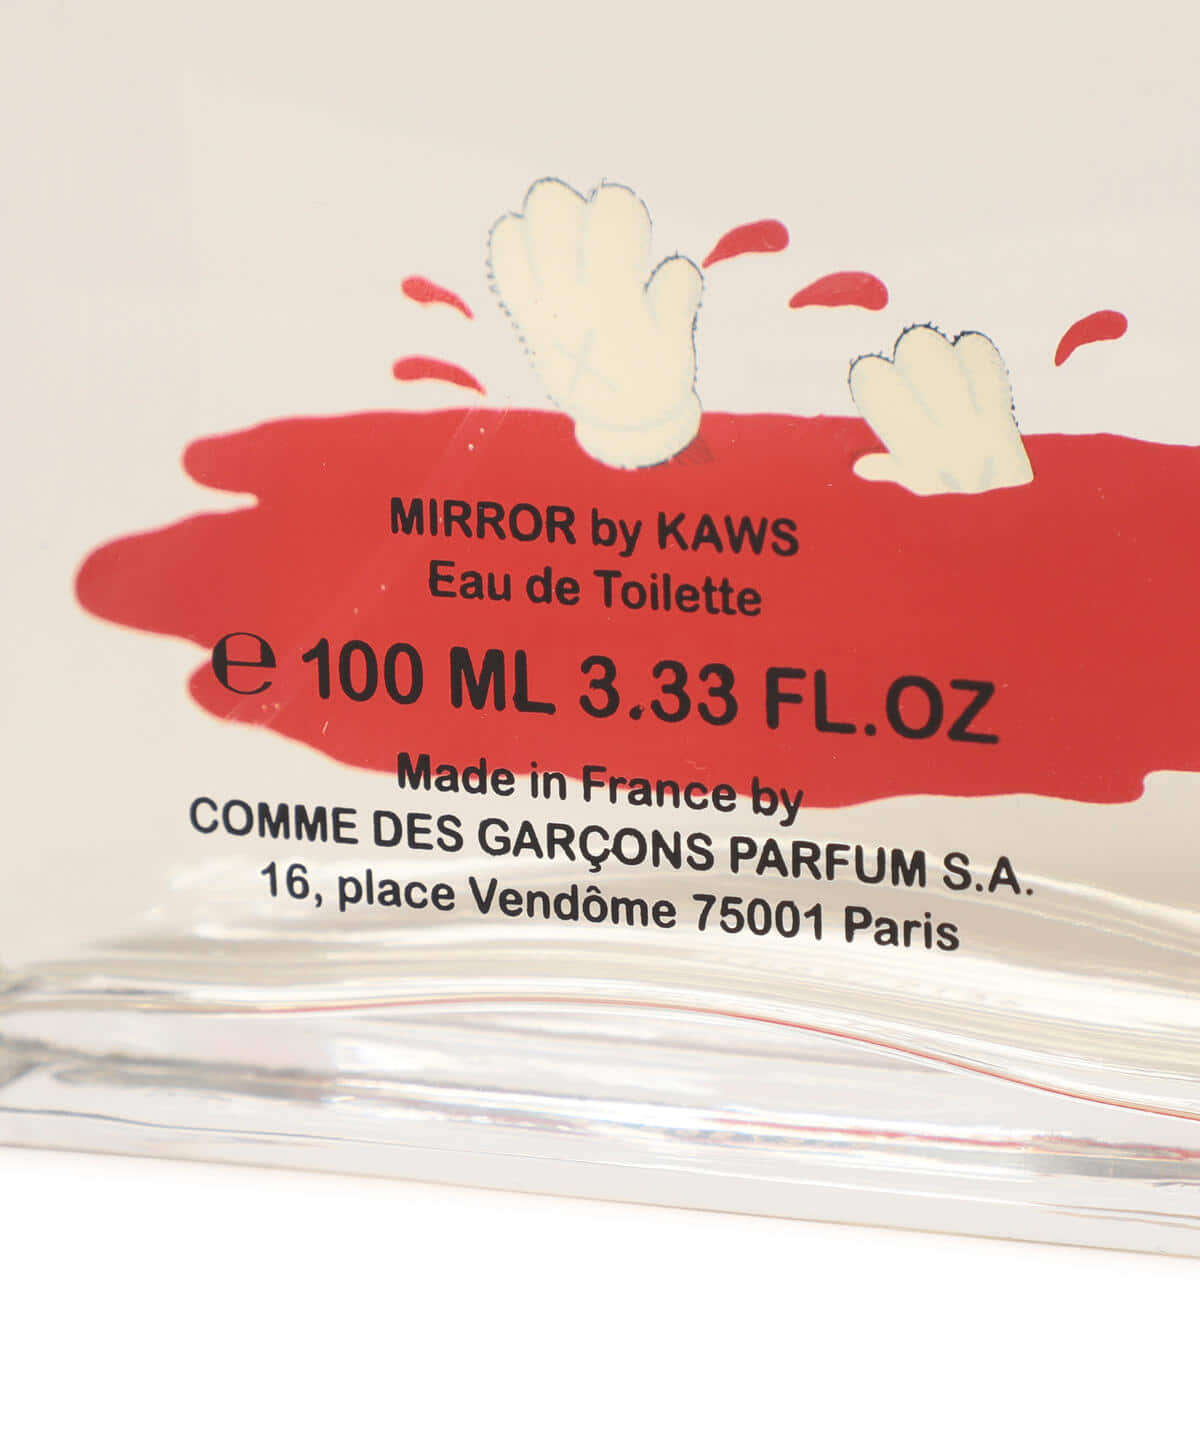 COMME des GARCONS オードトワレ MIRROR BY KAWS